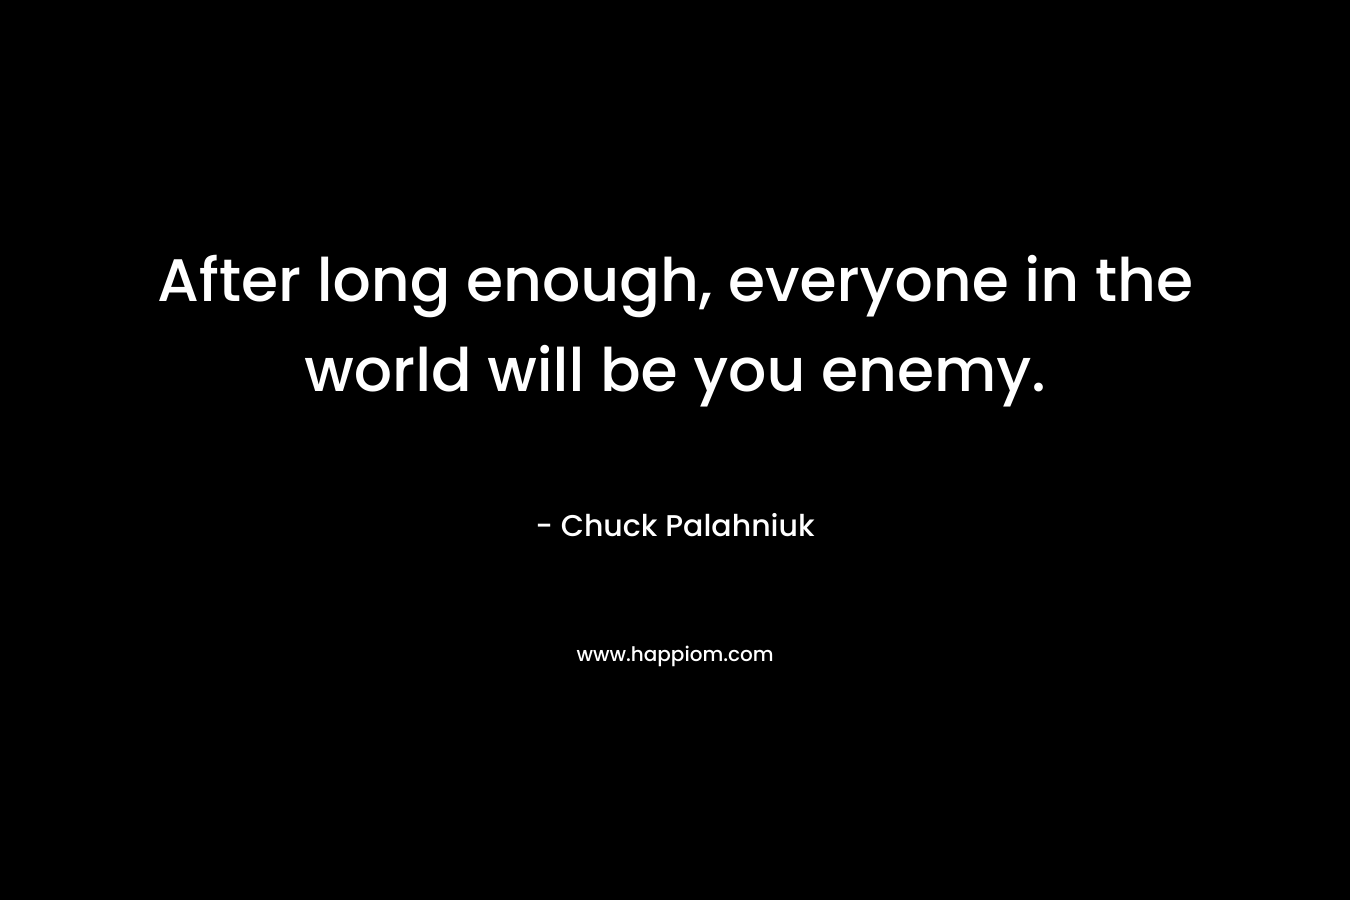 After long enough, everyone in the world will be you enemy.